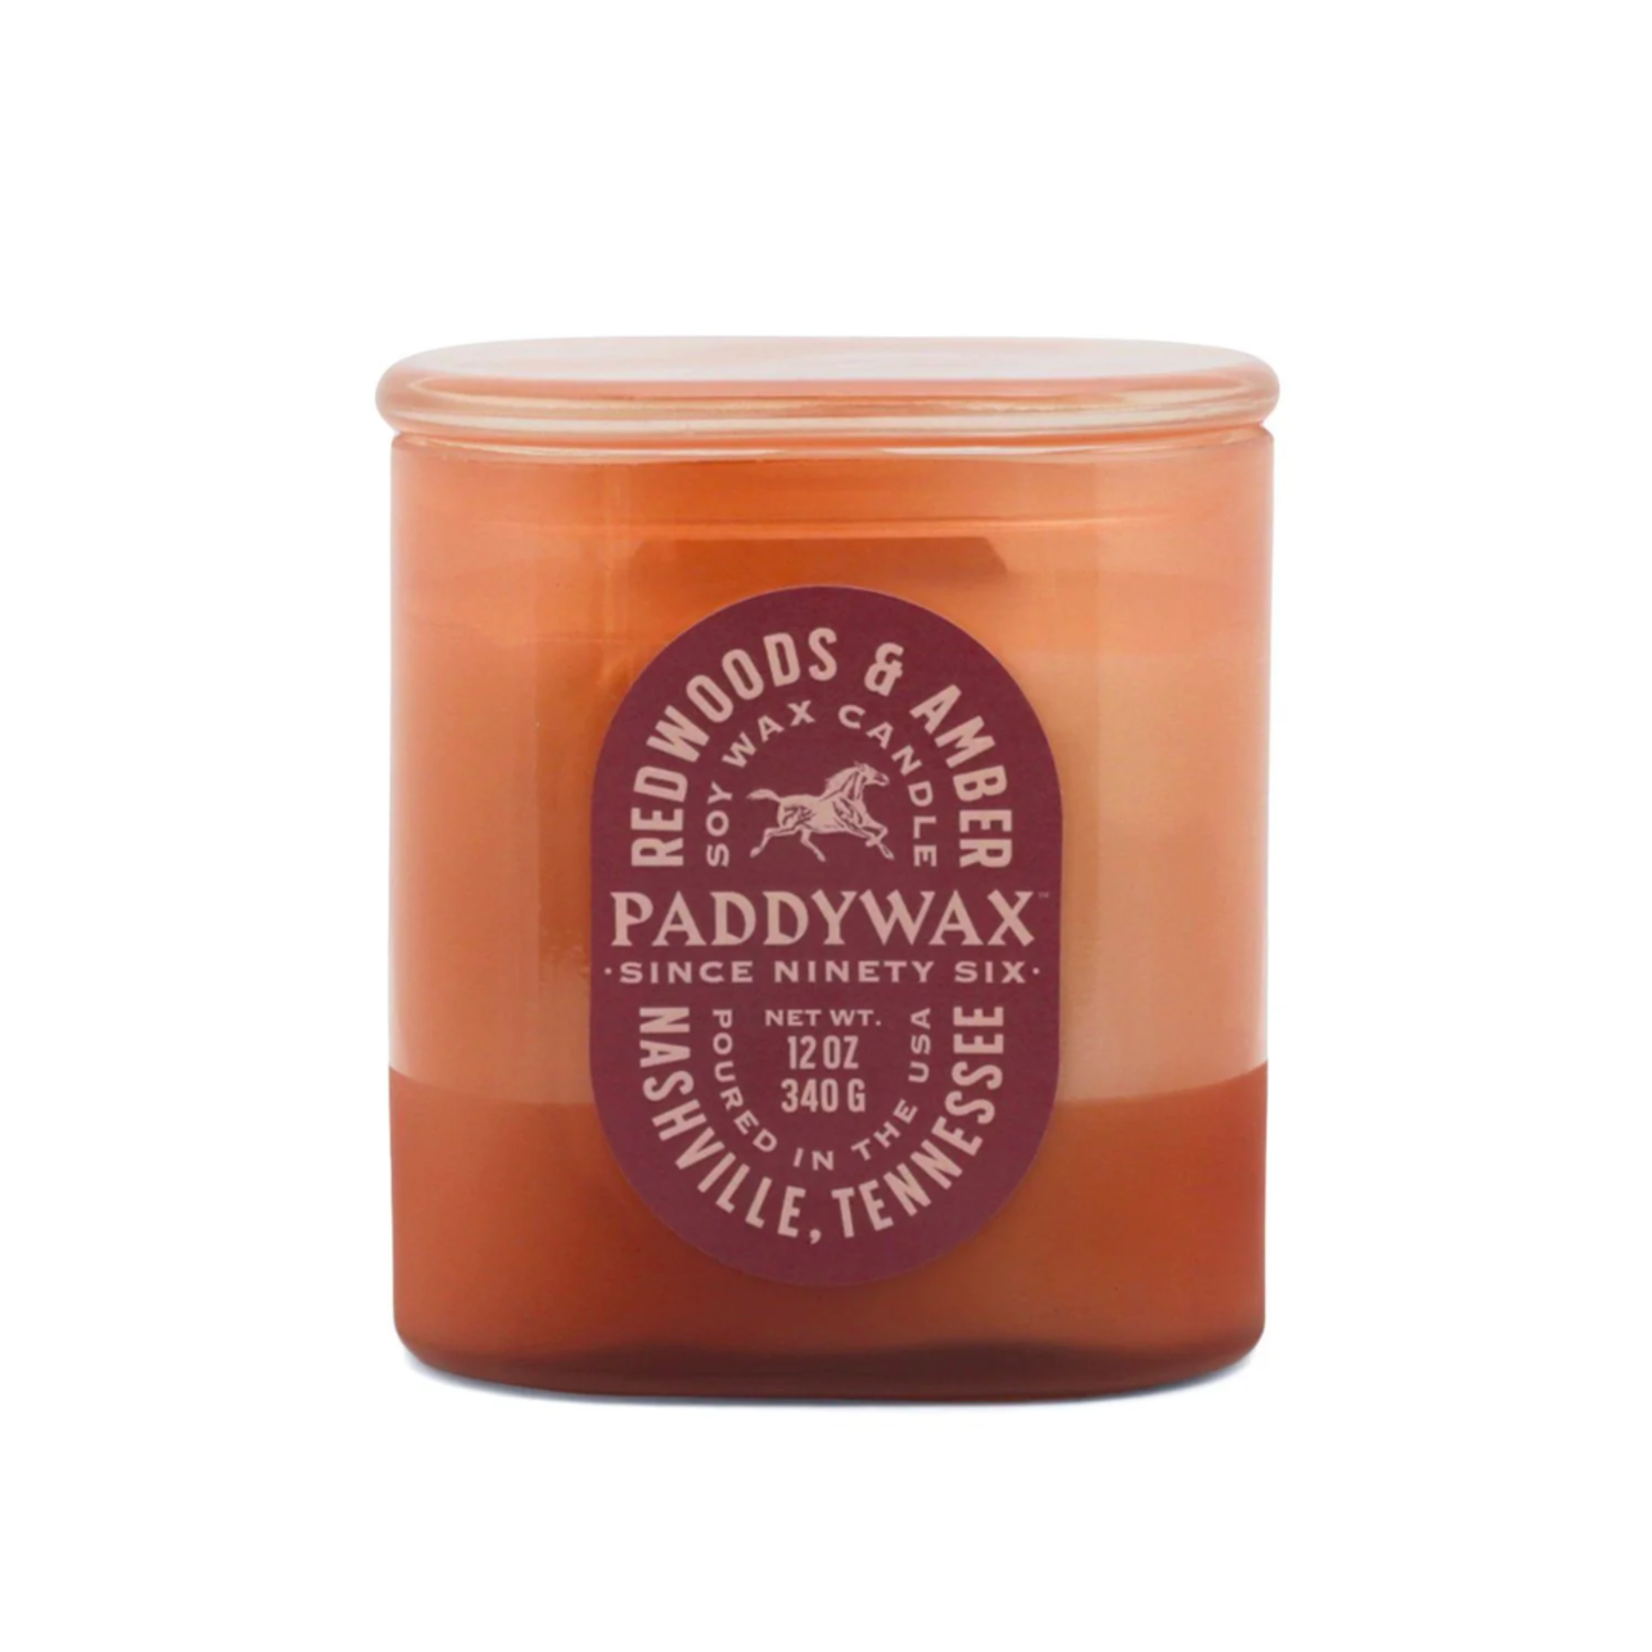 Paddywax Vista Candle | Redwoods & Amber